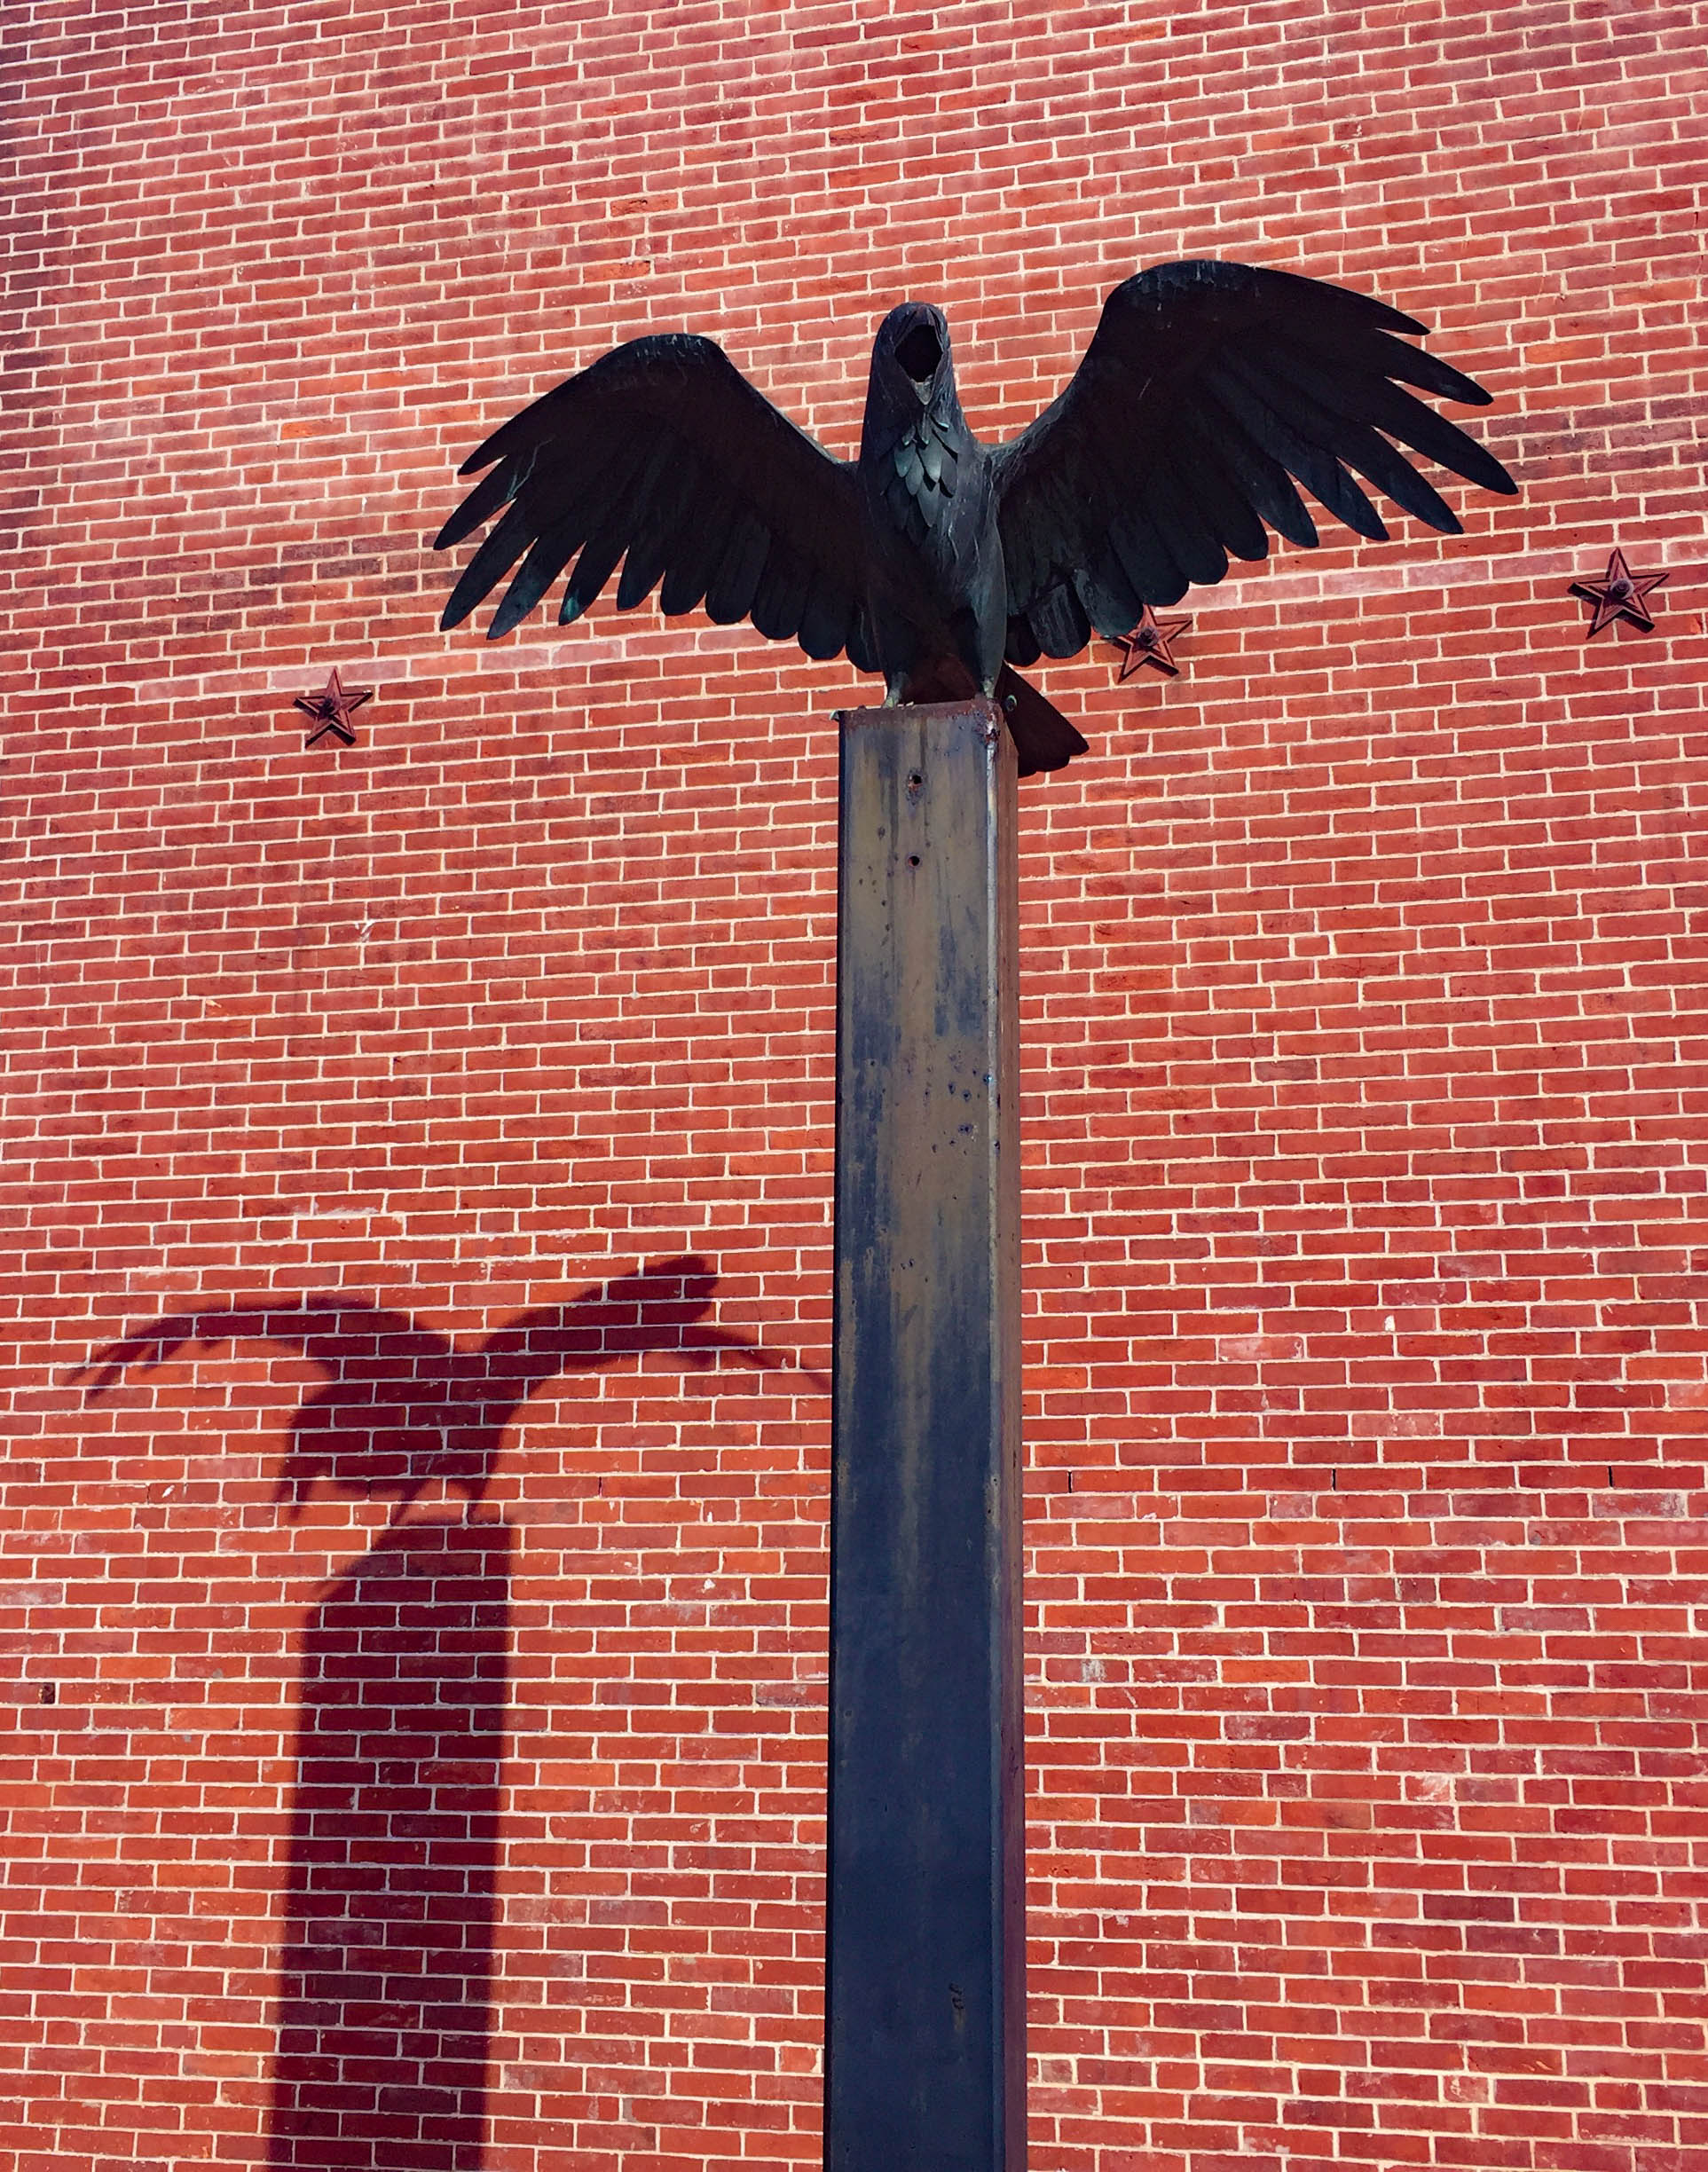 Statue of a raven spreading its wings outside of a brick building